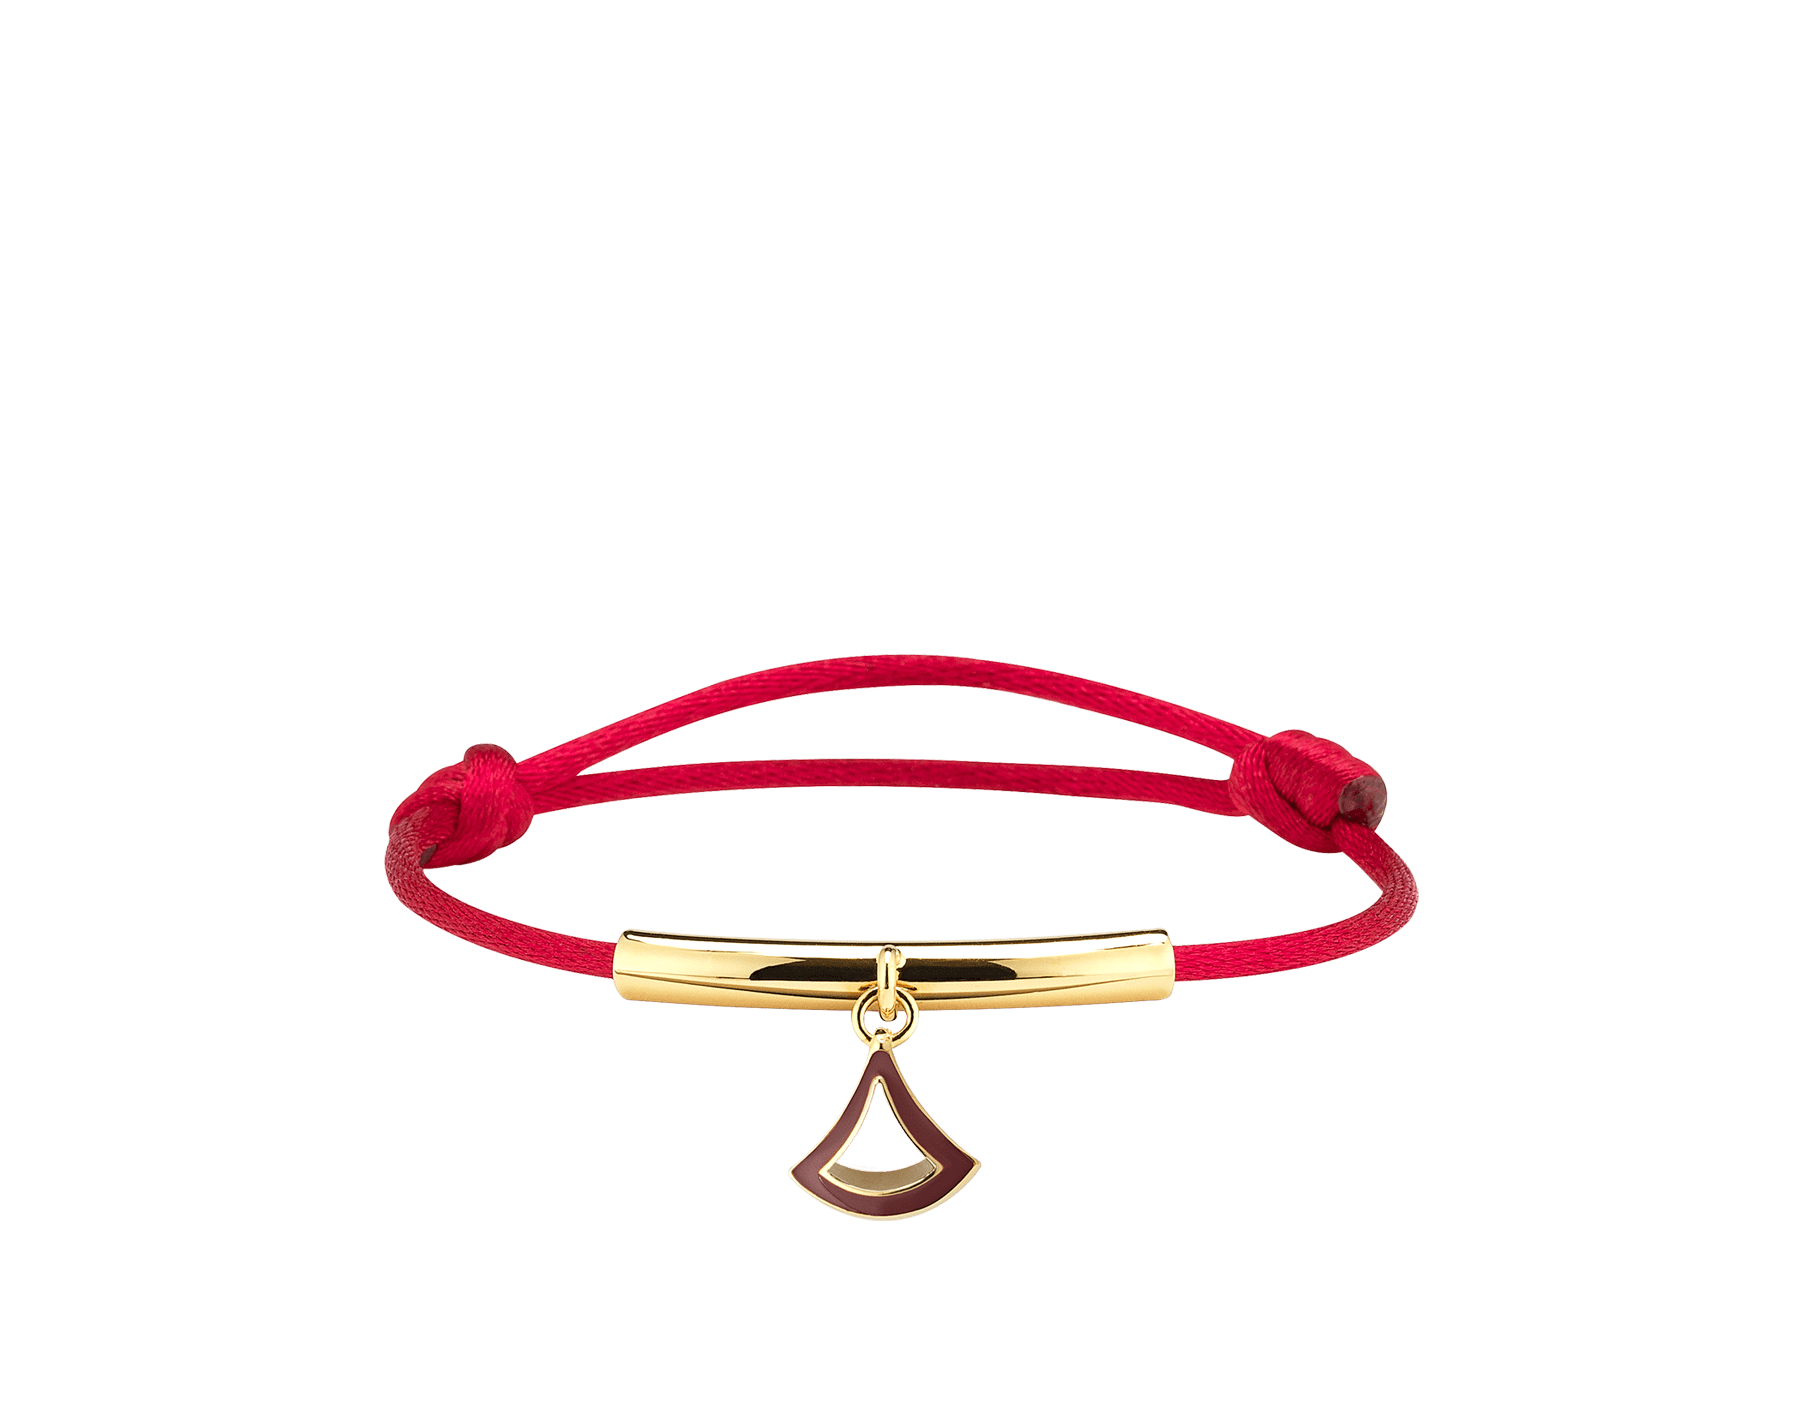 "Diva's Dream" bracelet in ruby red fabric with a gold-plated brass plate. Distinctive Diva charm in gold-plated brass enamelled in ruby red. DIVAMINISTRINGb image 1